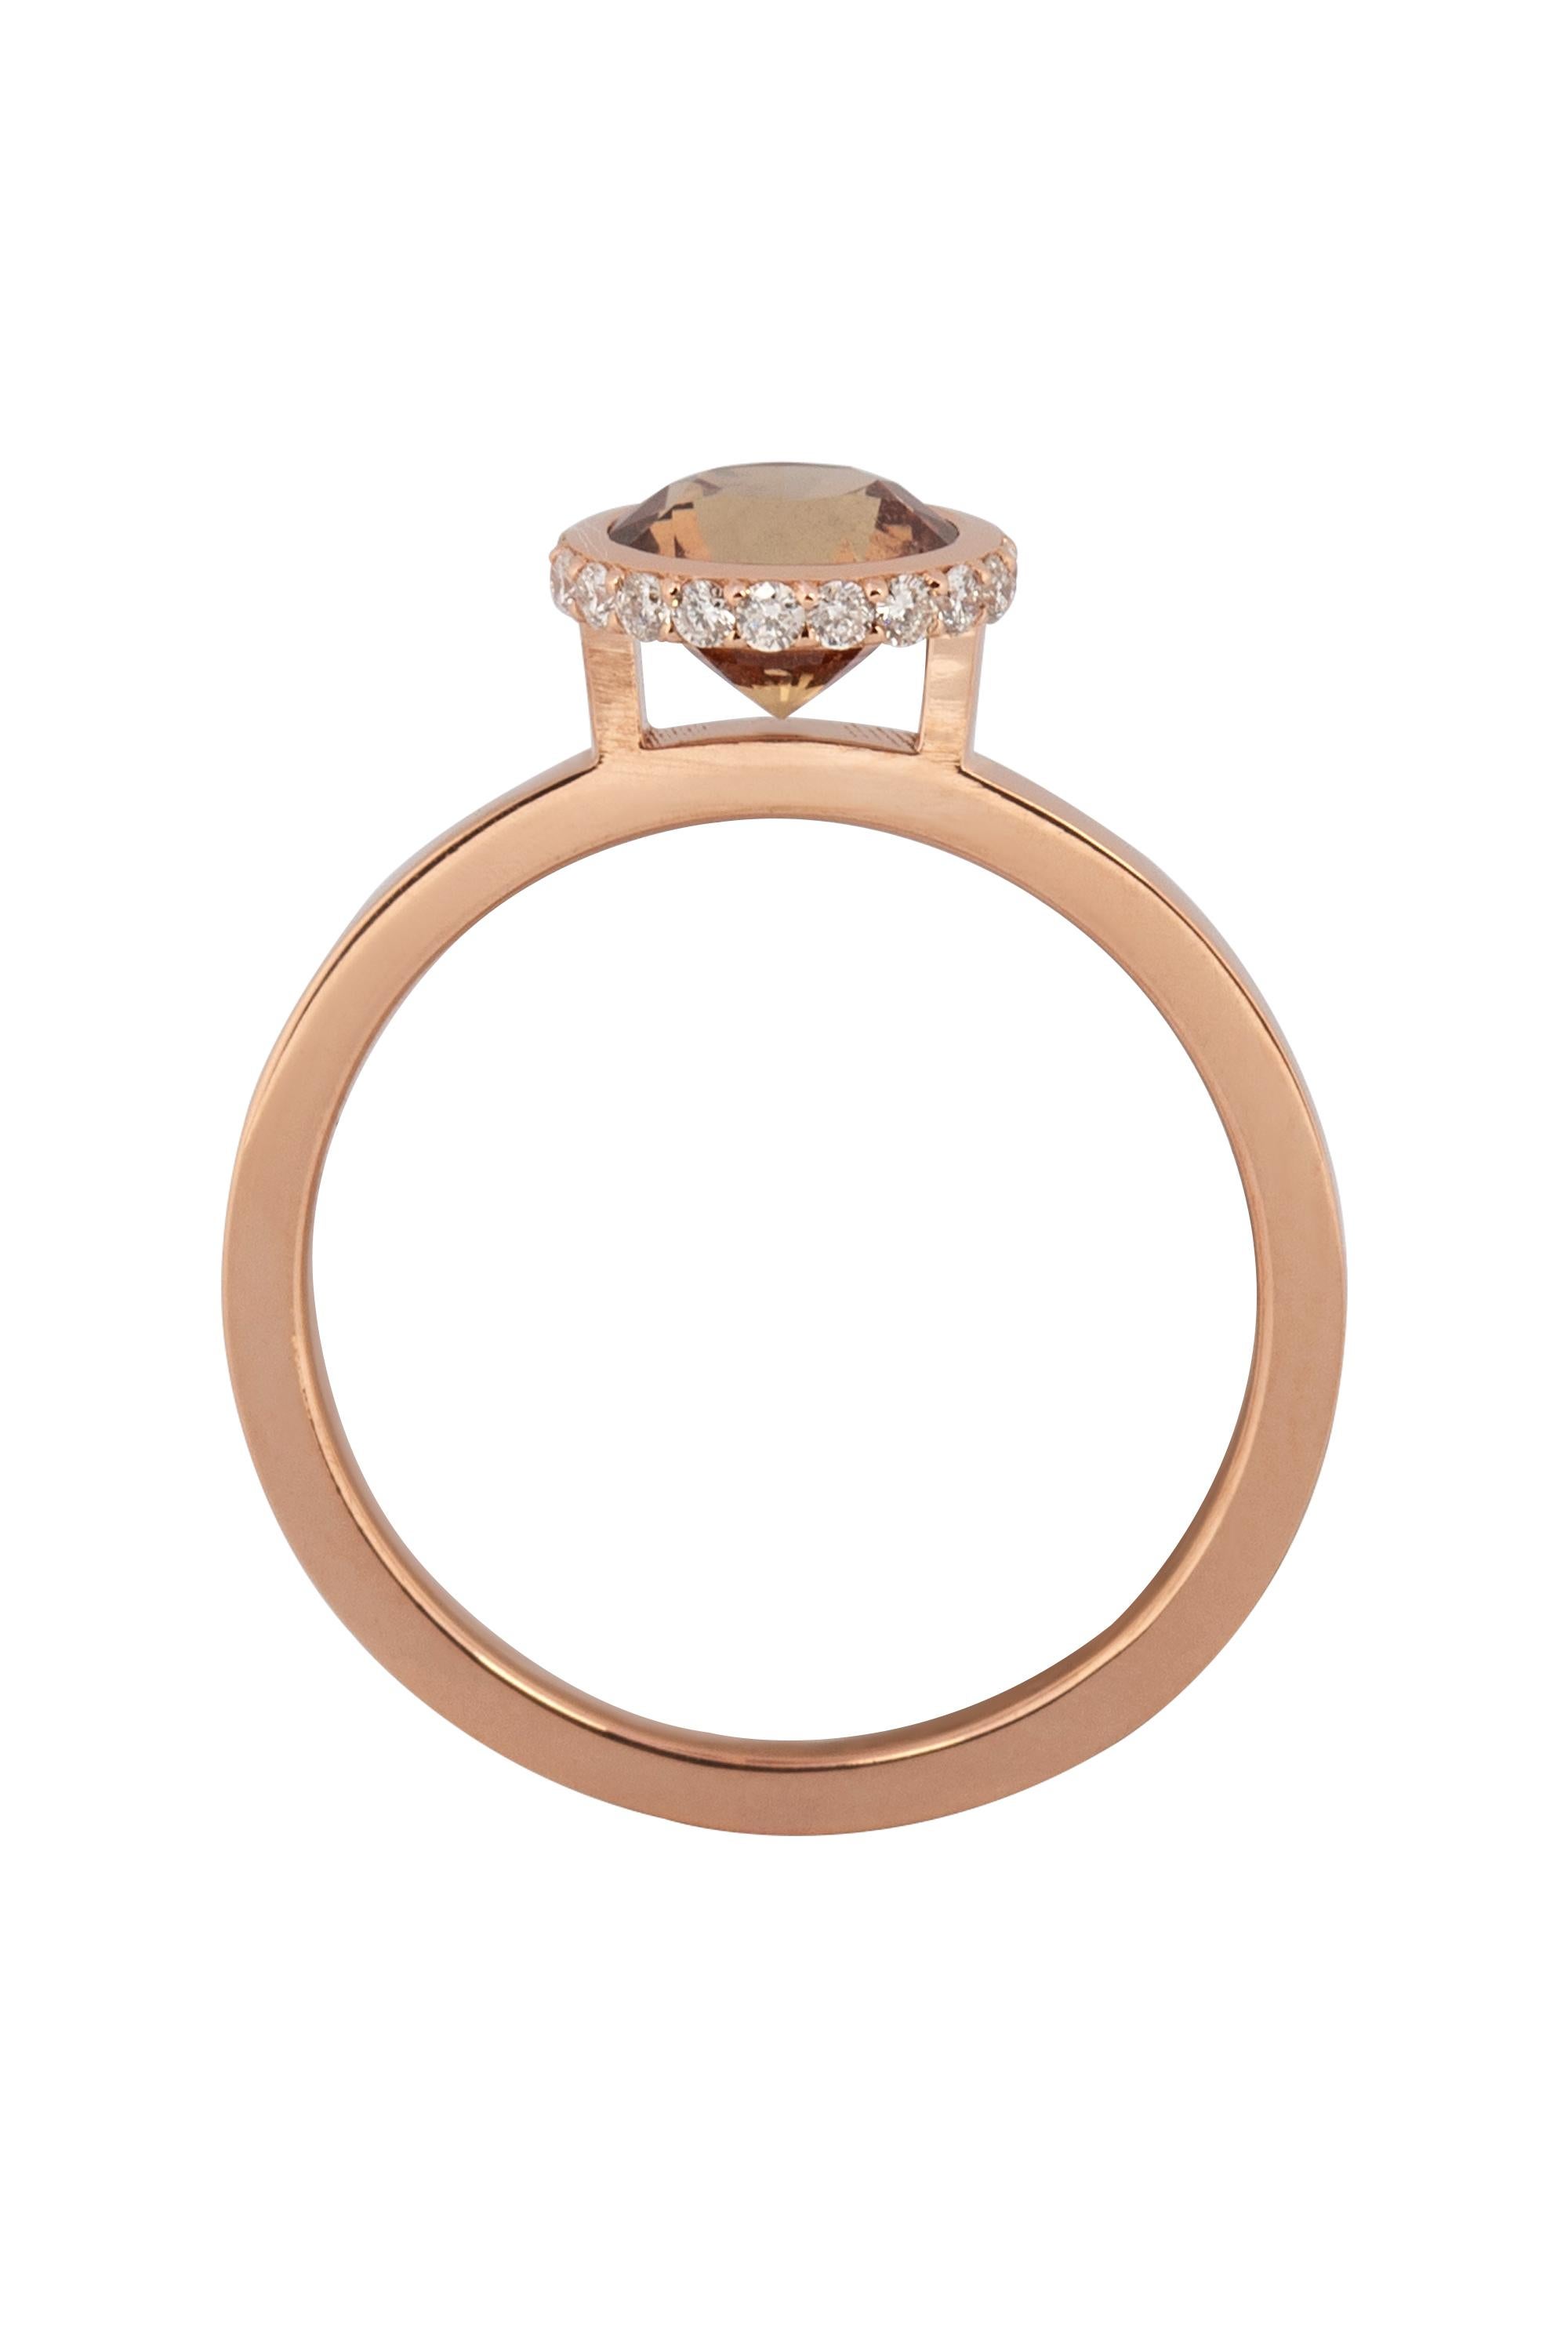 A strikingly modern solitaire ring featuring a round warm brownish orange sapphire, weighing approximately 1.25 carats, adroitly set in a custom made bezel frame edged in sparkling round brilliant diamonds weighing approximately .25 carats. Crafted